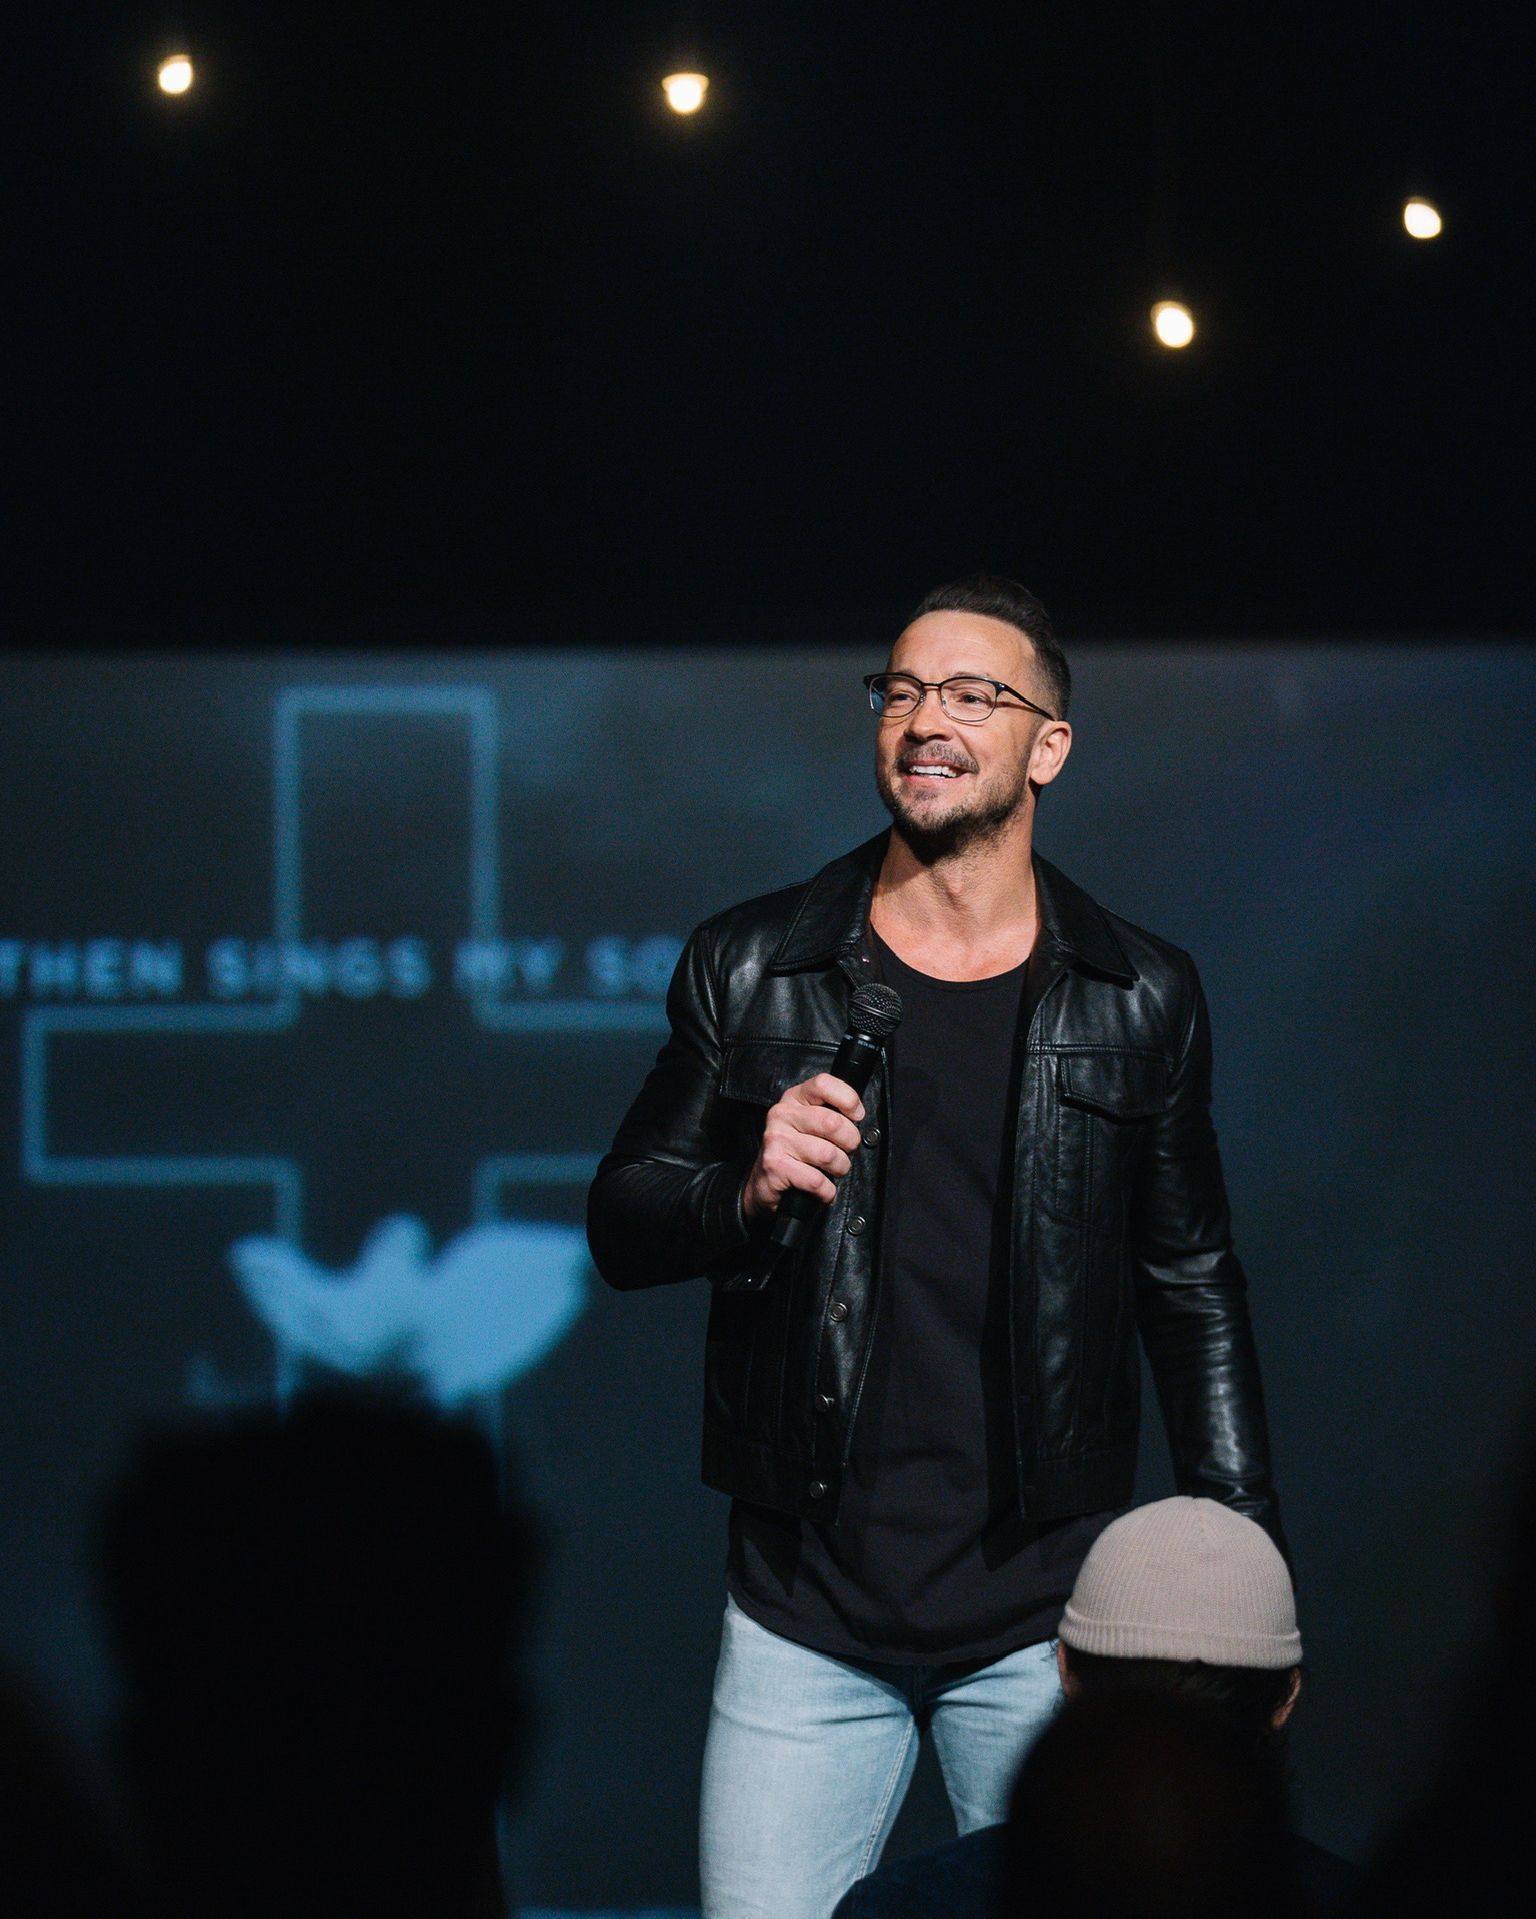 Hillsong church appears to have tried to cover up a street fight